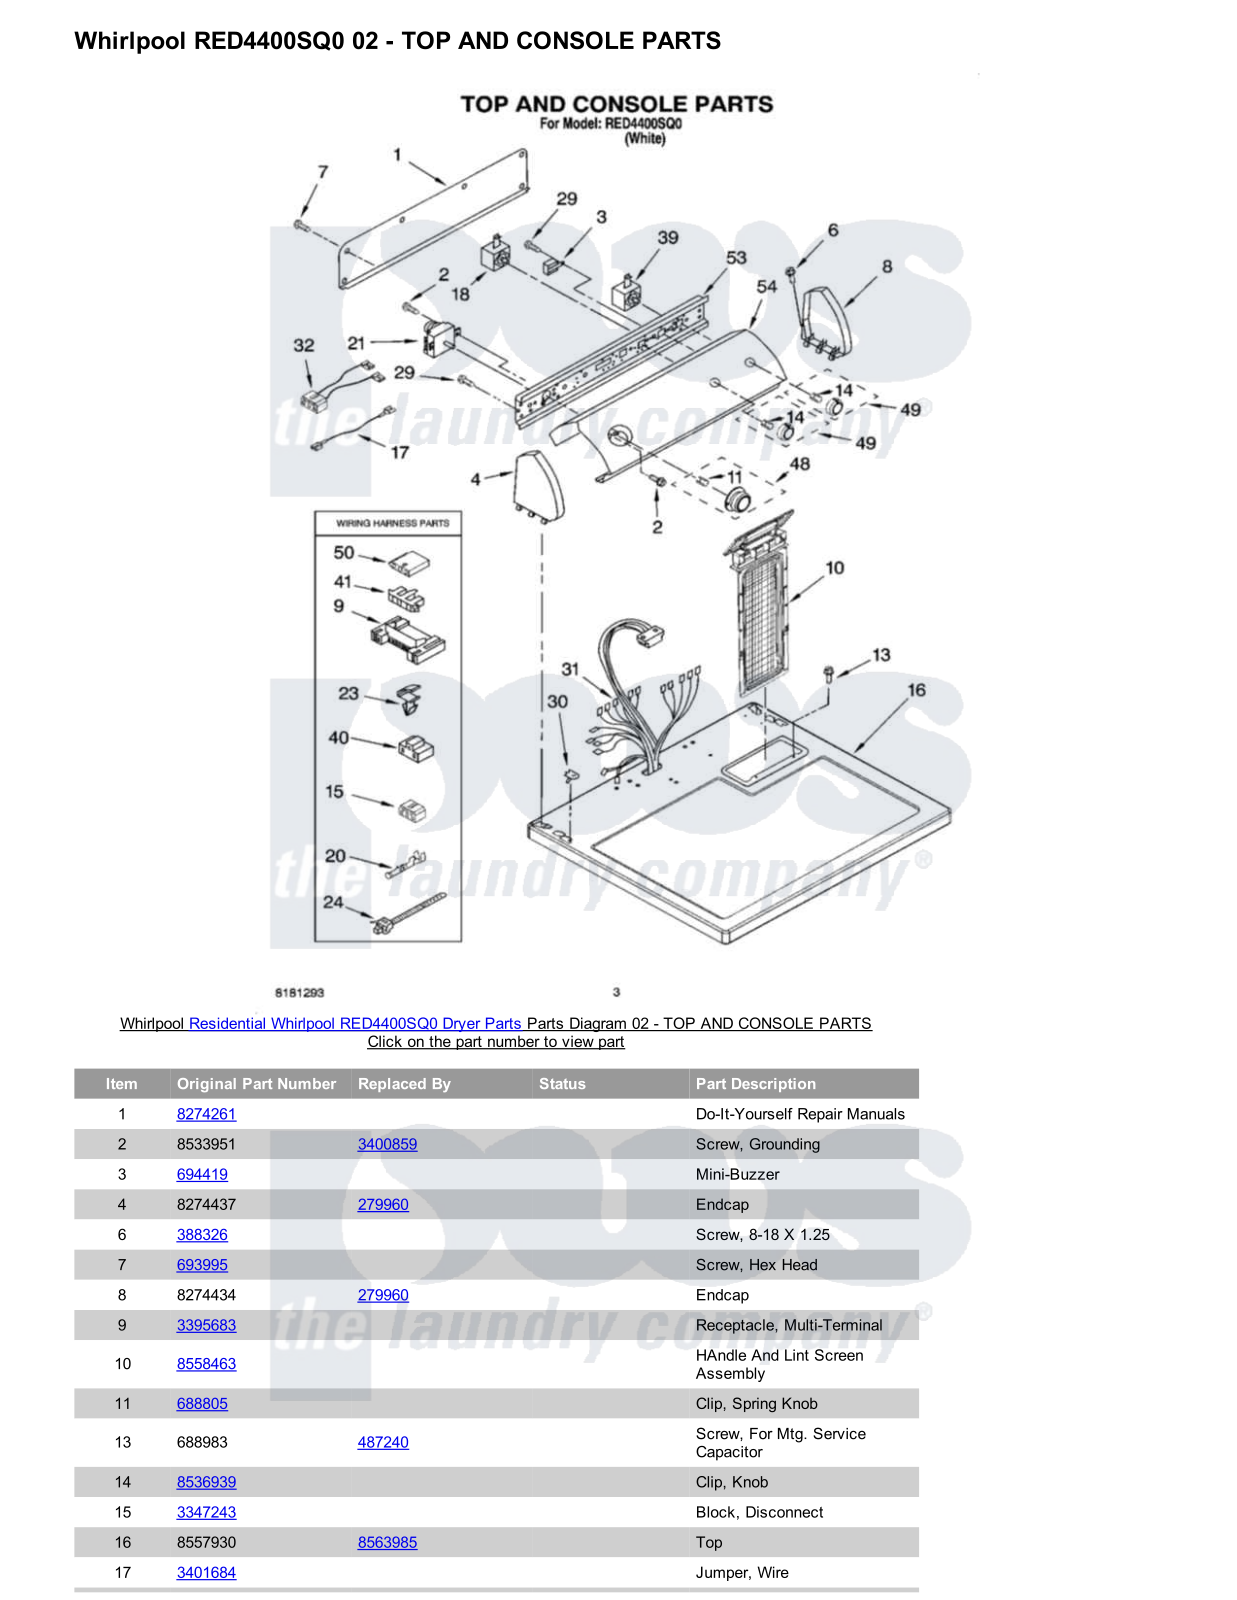 Whirlpool RED4400SQ0 Parts Diagram